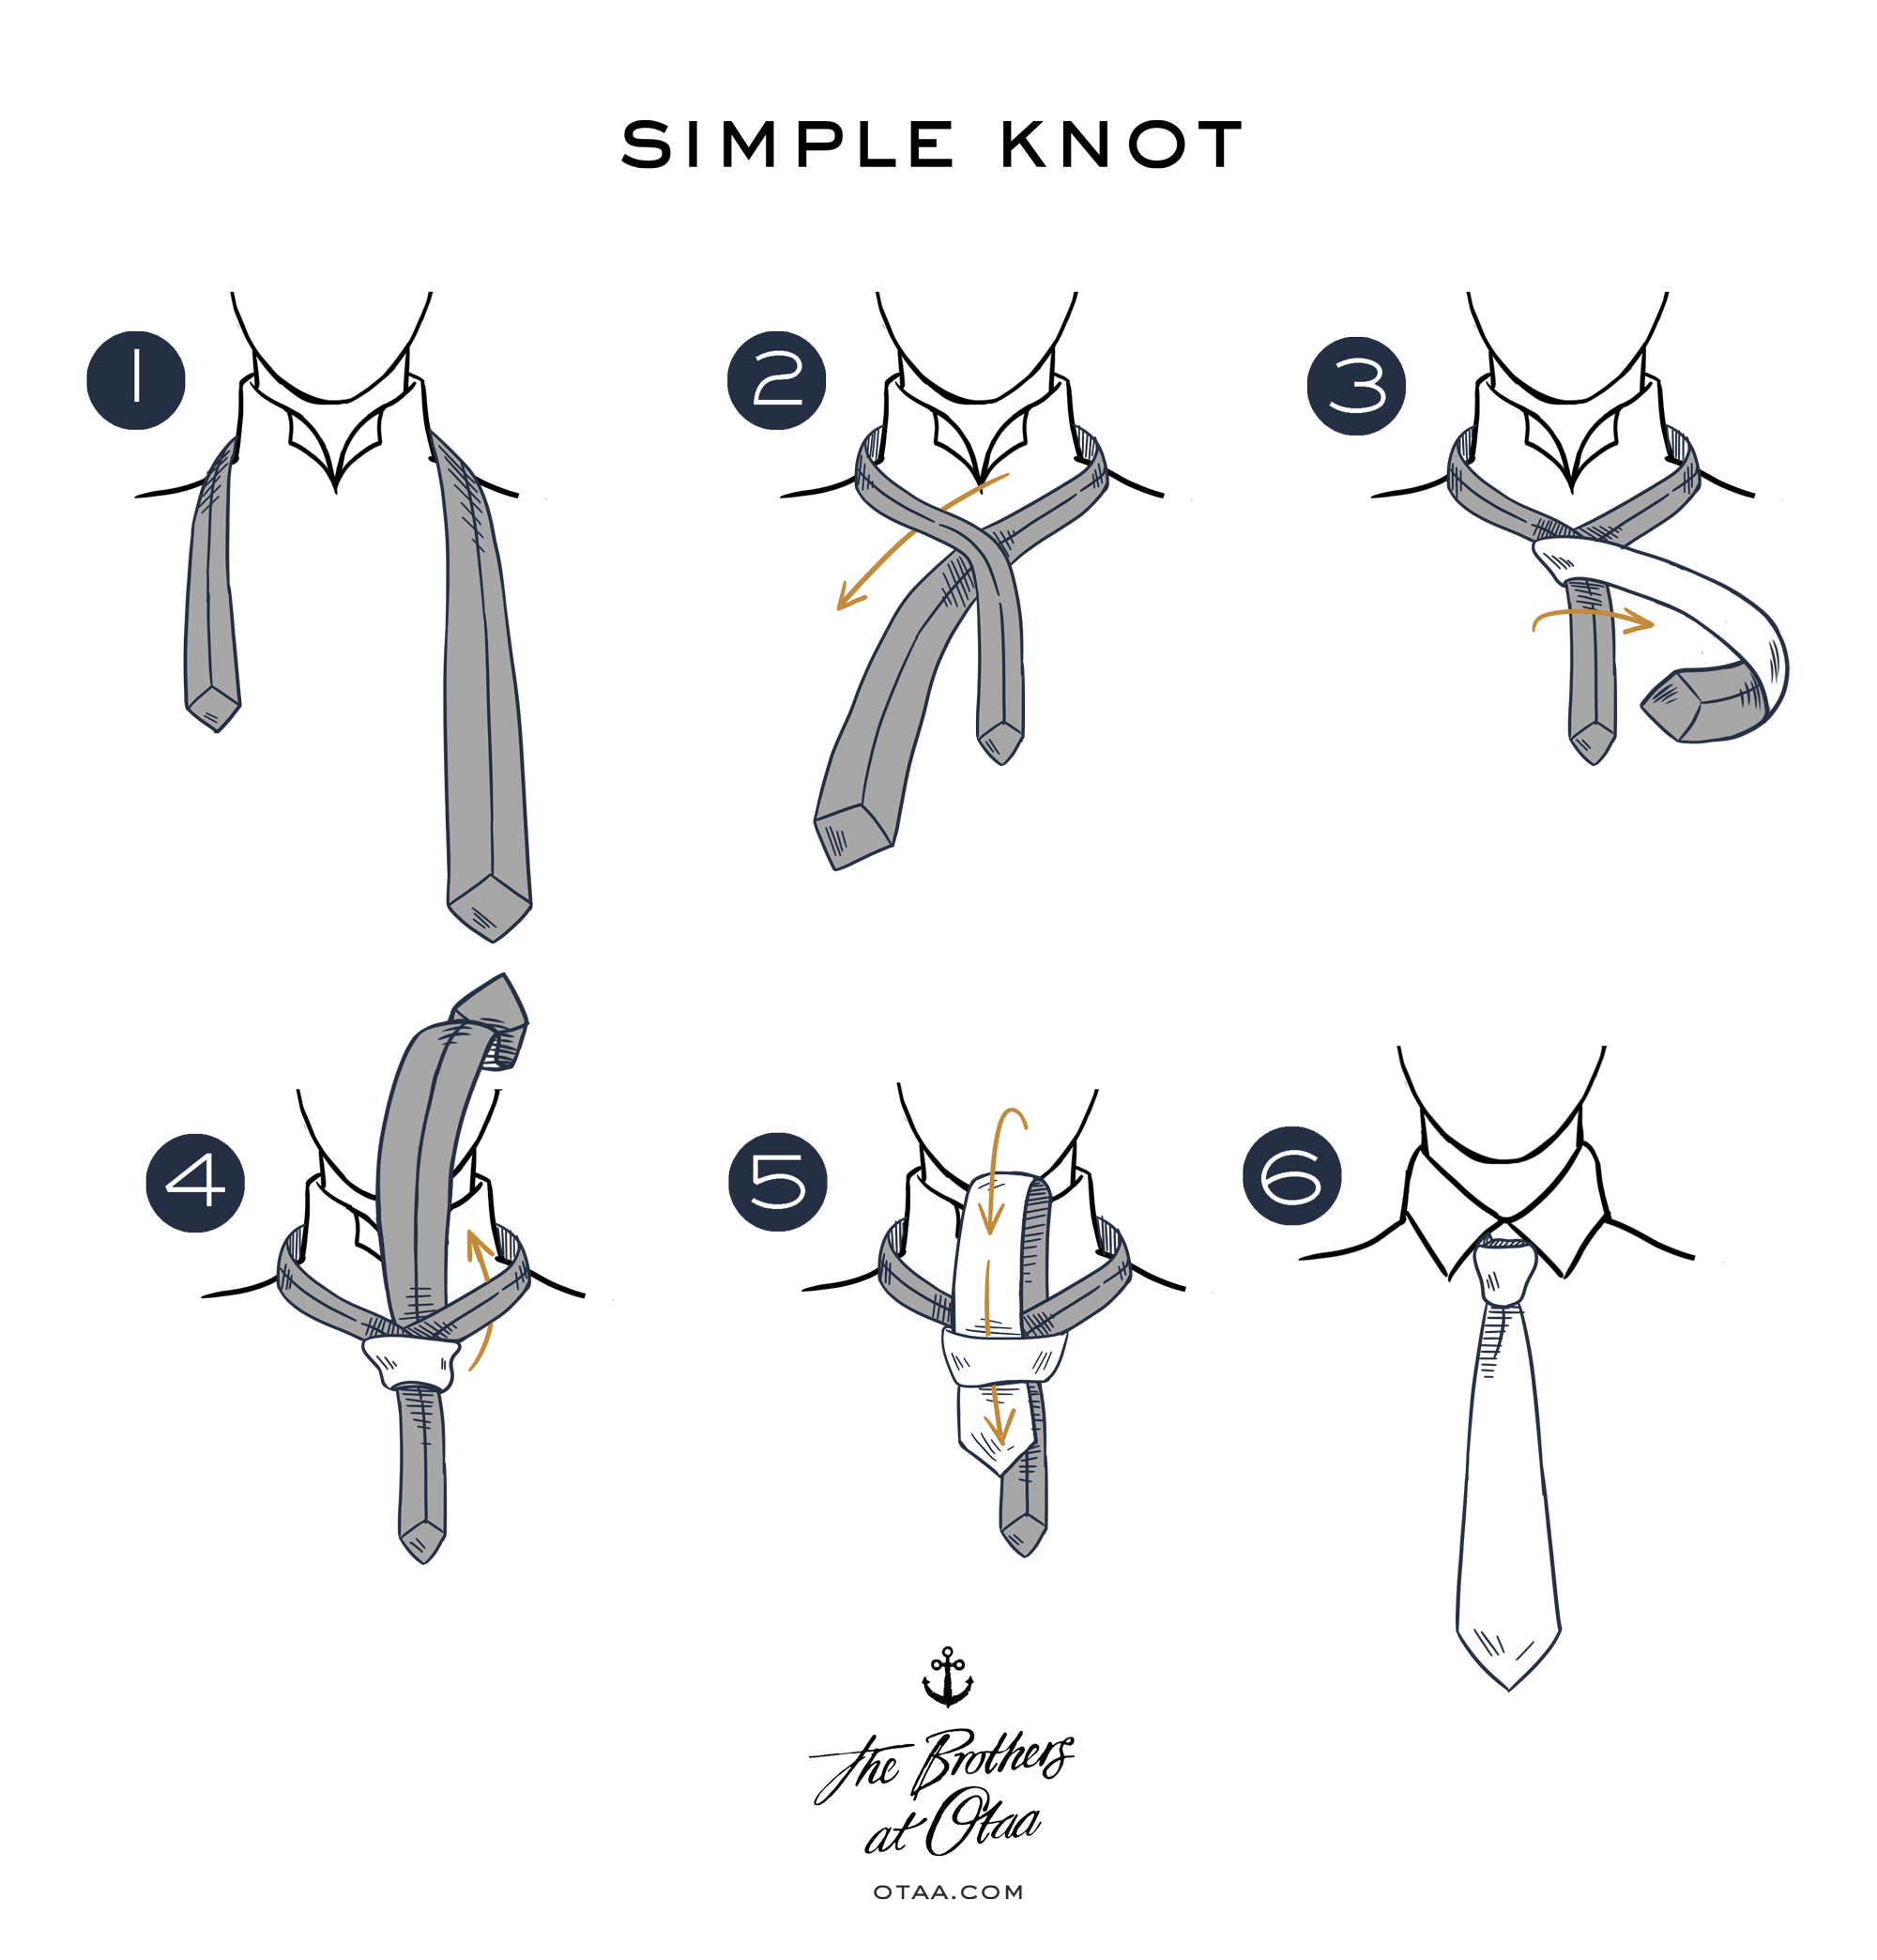 How to tie a tie - VERY simple and easy tie knot for beginners